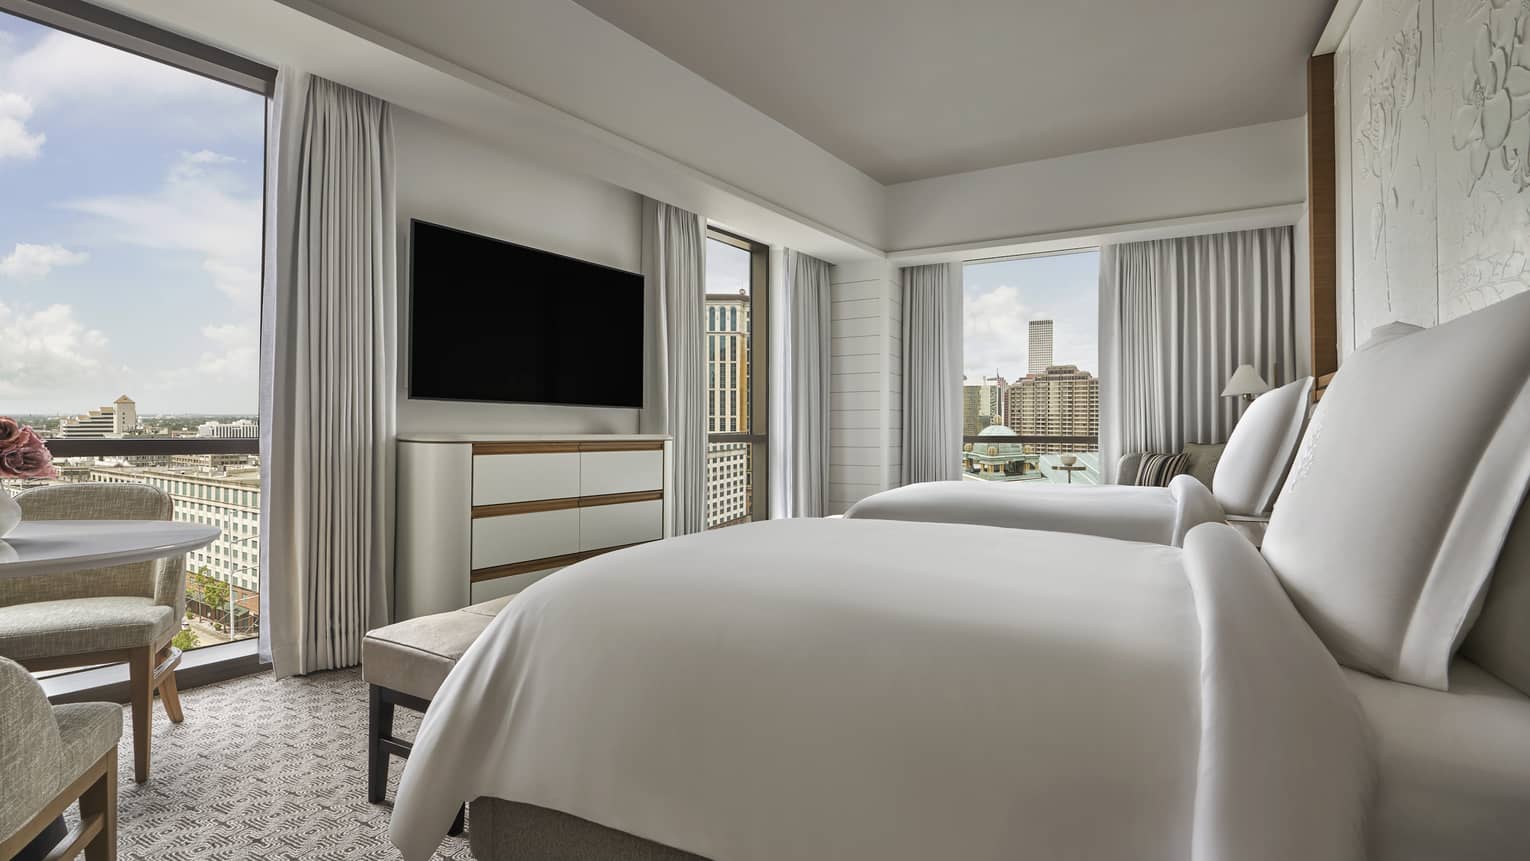 Queen bed with white linens, white curtains and chest of drawers, wall-mounted television, floor-to-ceiling windows with view of downtown New Orleans